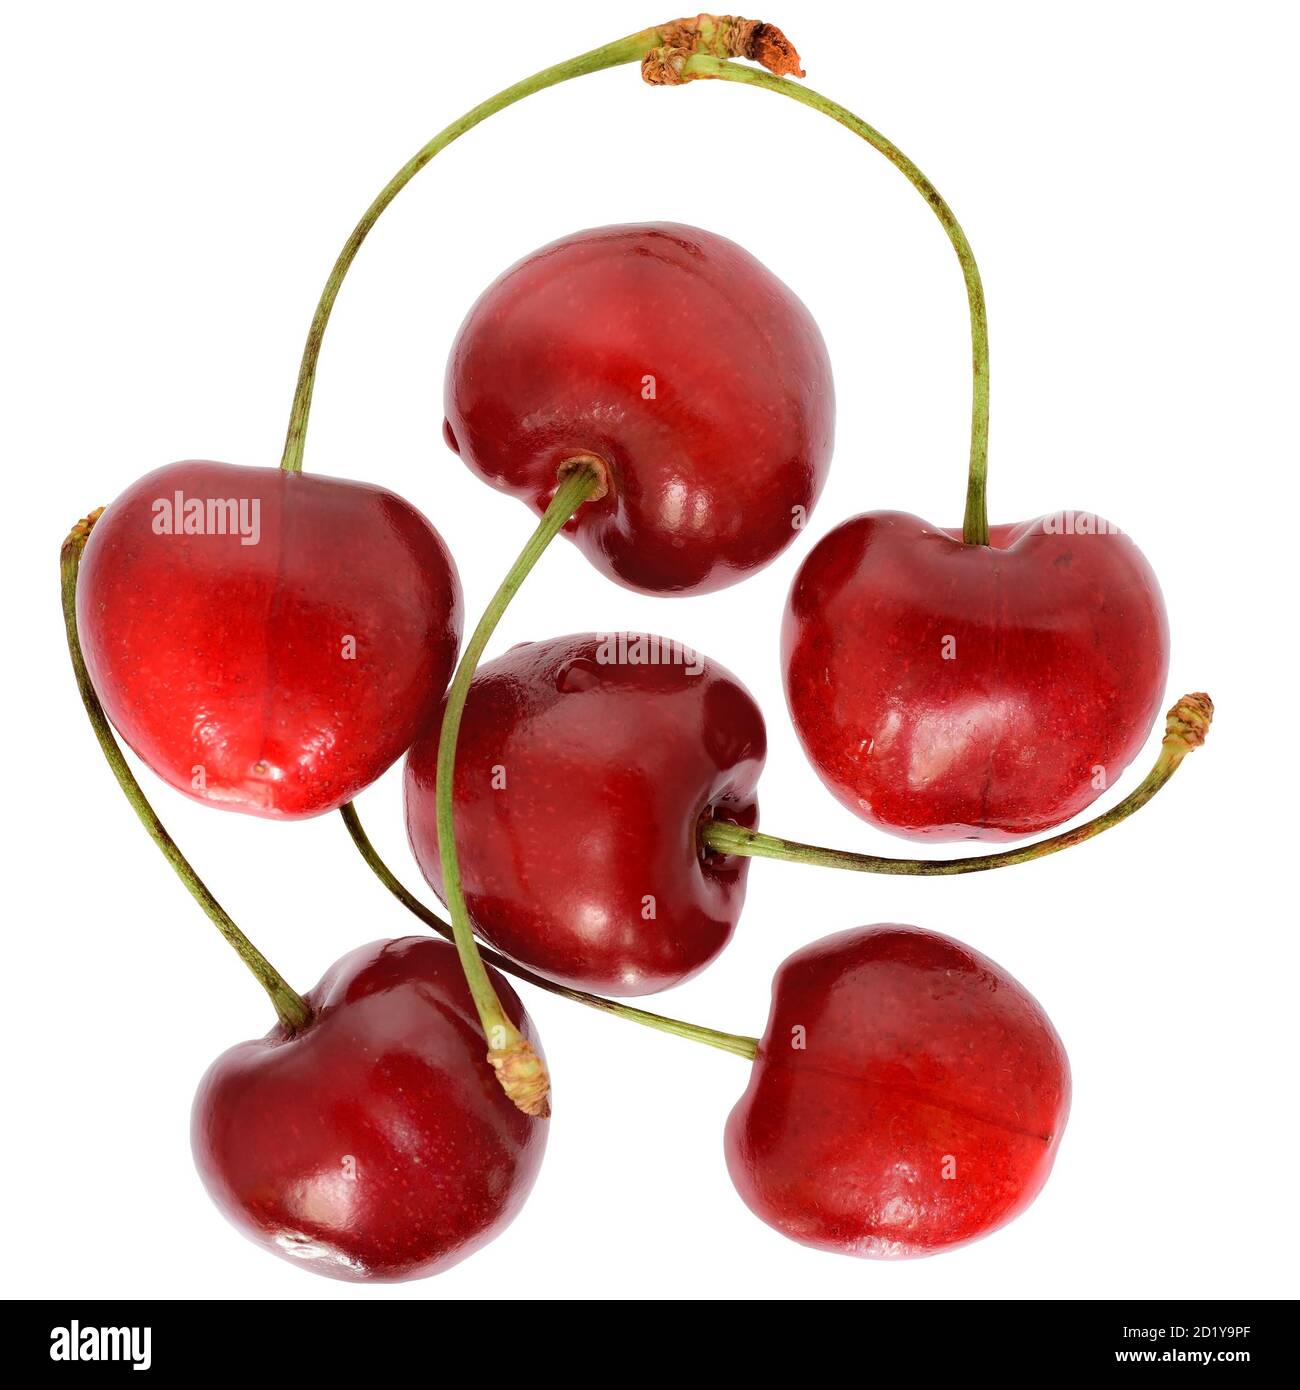 Sweet cherry top view isolated on a white background. Stock Photo